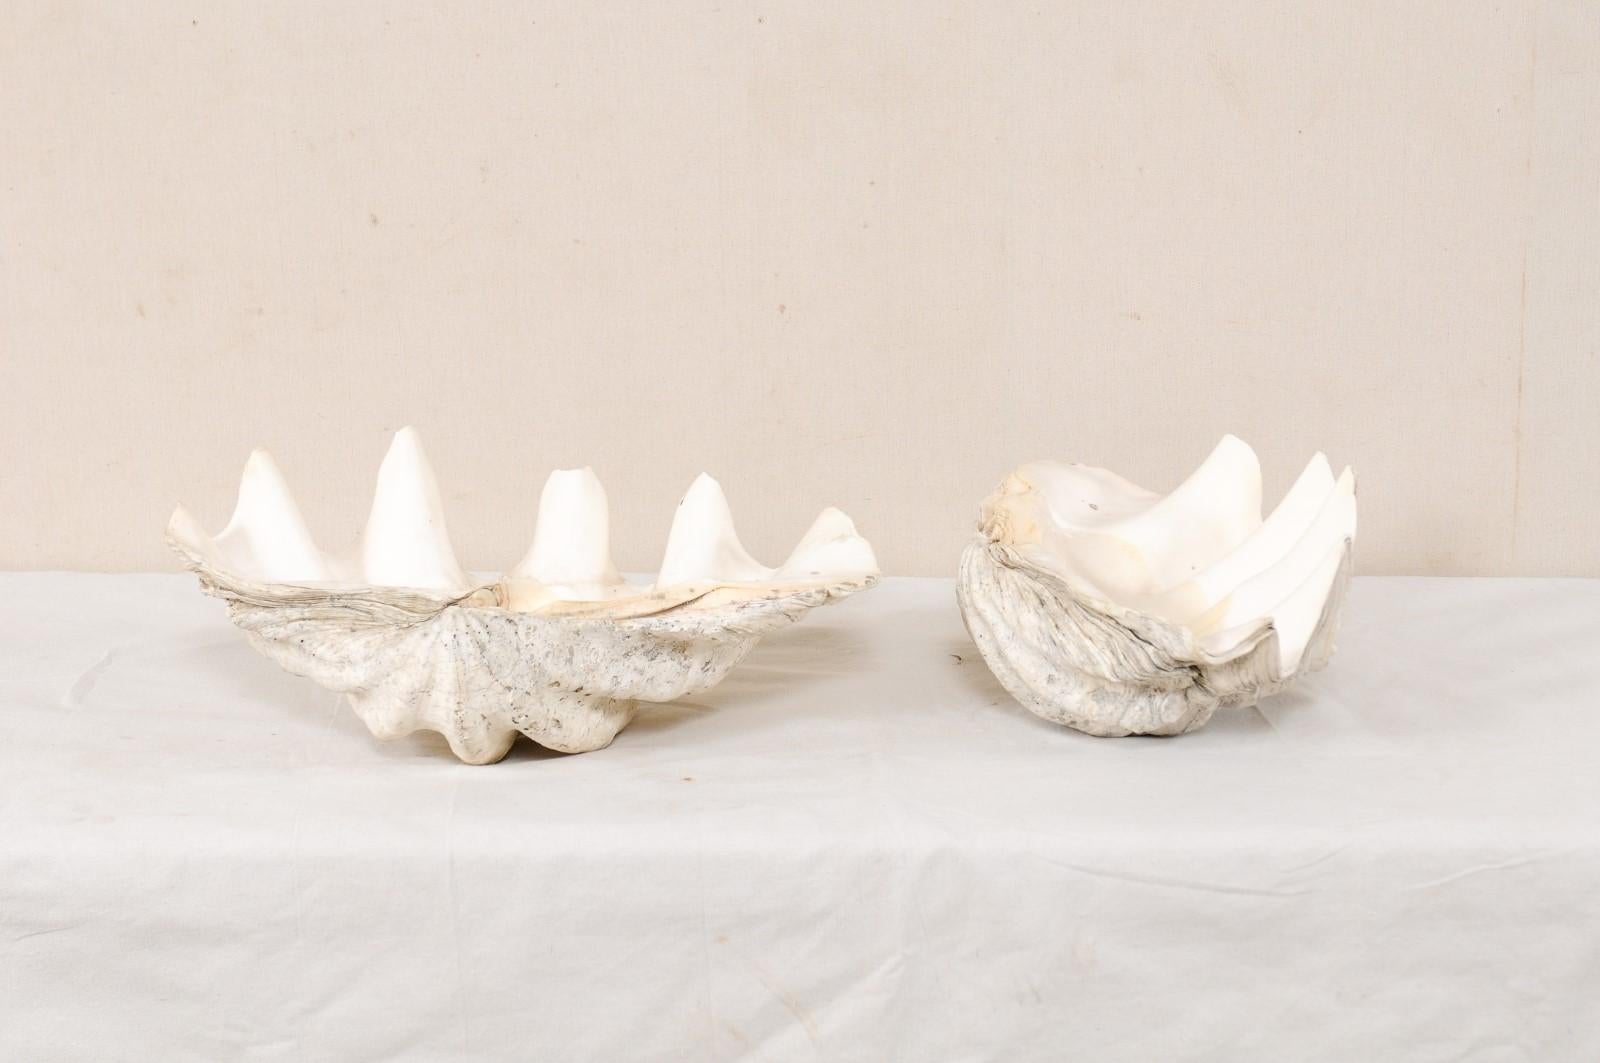 20th Century Pair of Giant Clam Shells, Make Beautiful Nautical Art Pieces or Bowls